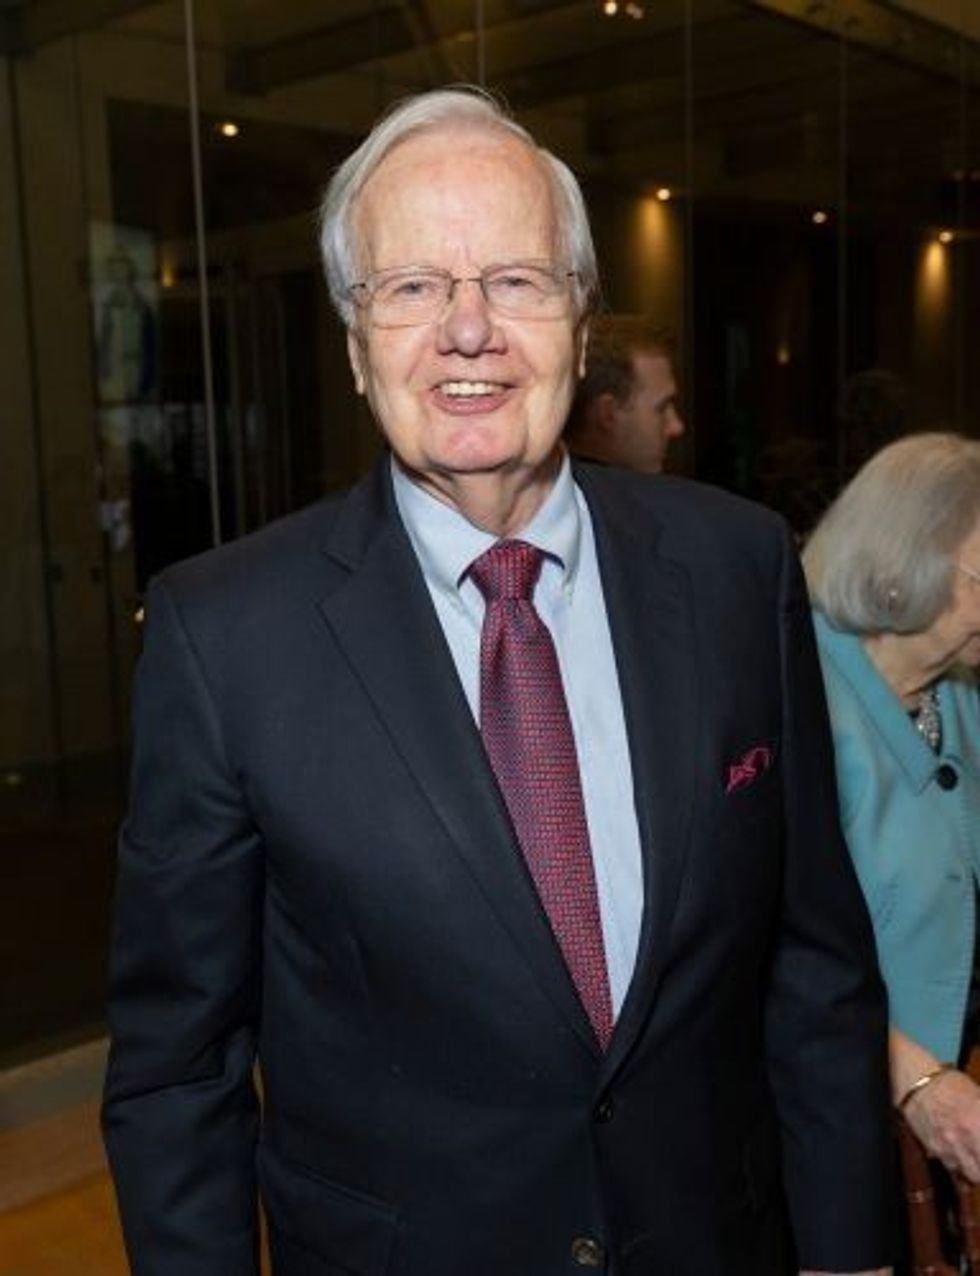 Bill Moyers is well recognized for his civic activities and investigative journalism.